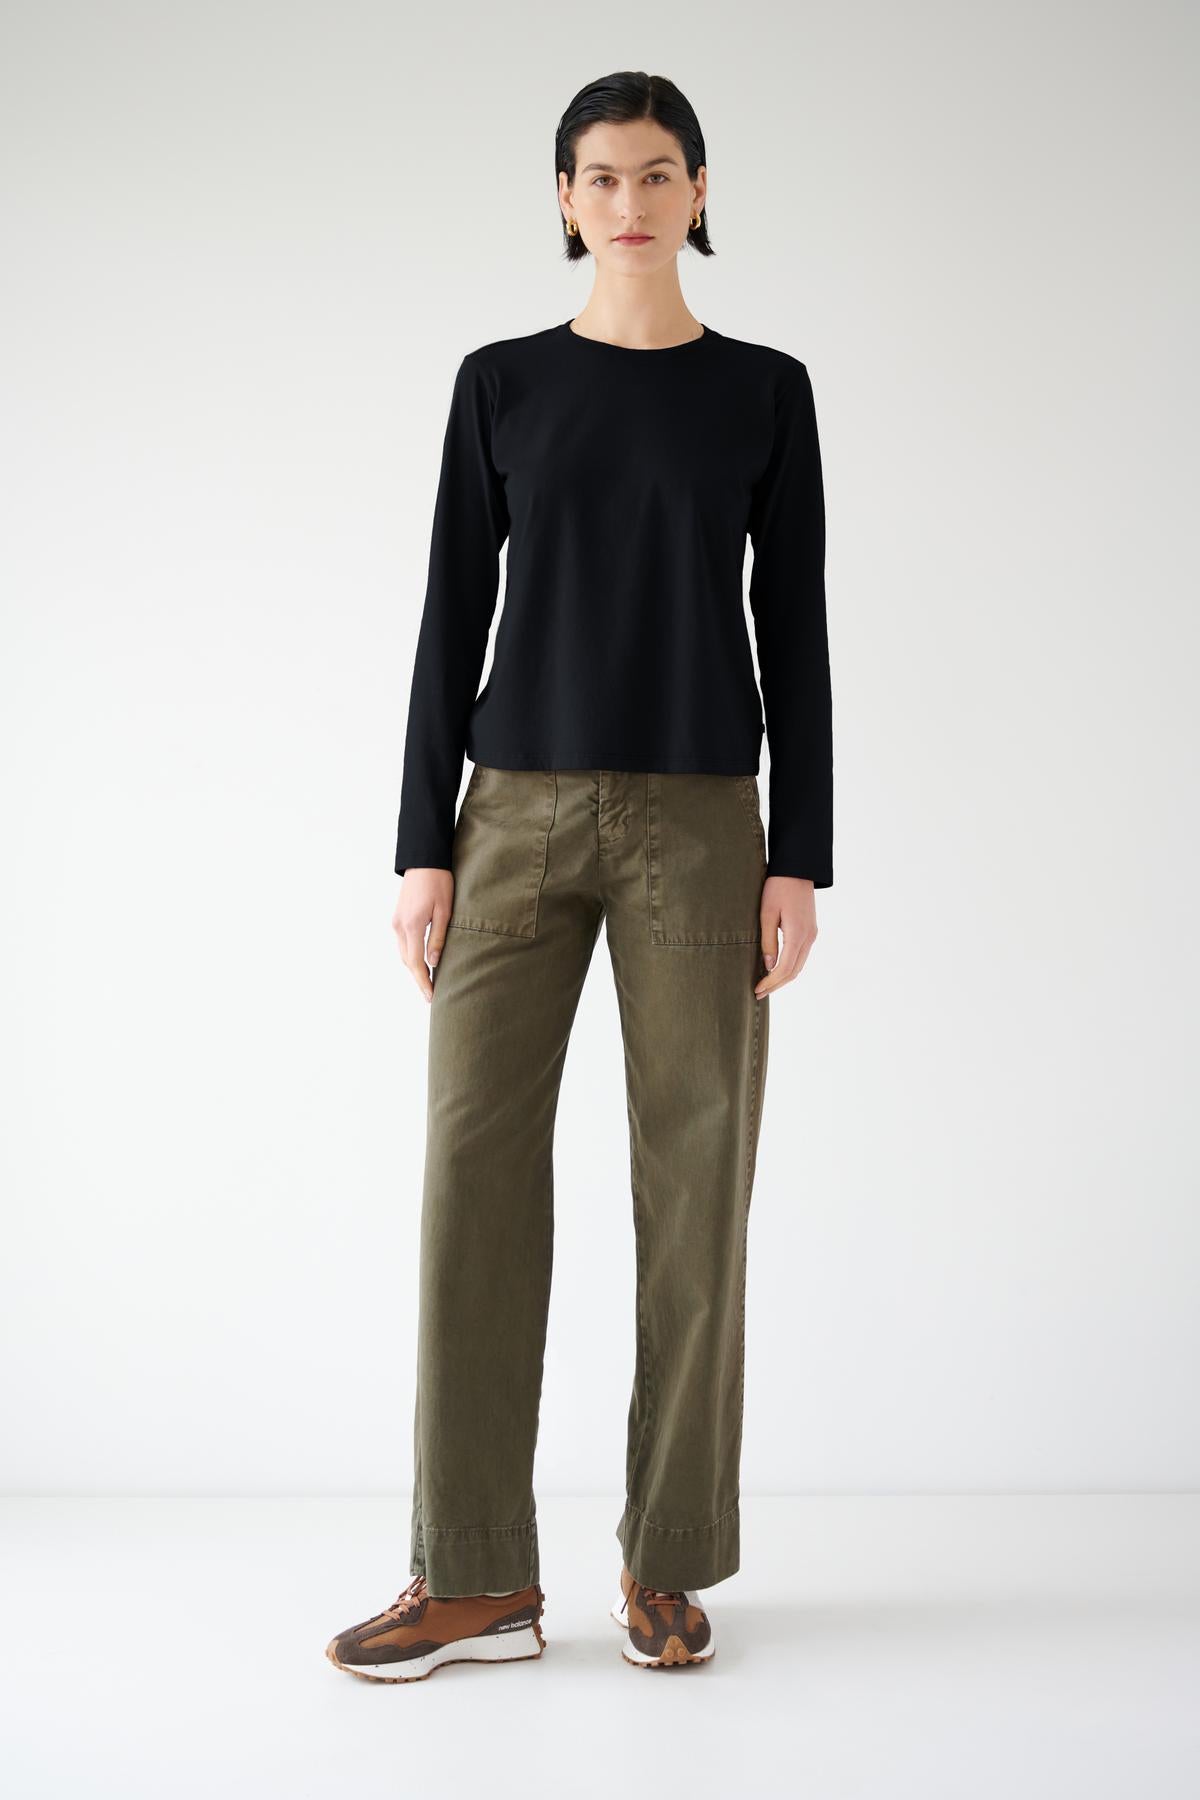   A woman wearing a Velvet by Jenny Graham VICENTE TEE, a relaxed fit black top, and organic cotton green pants, showcasing seasonless dressing. 